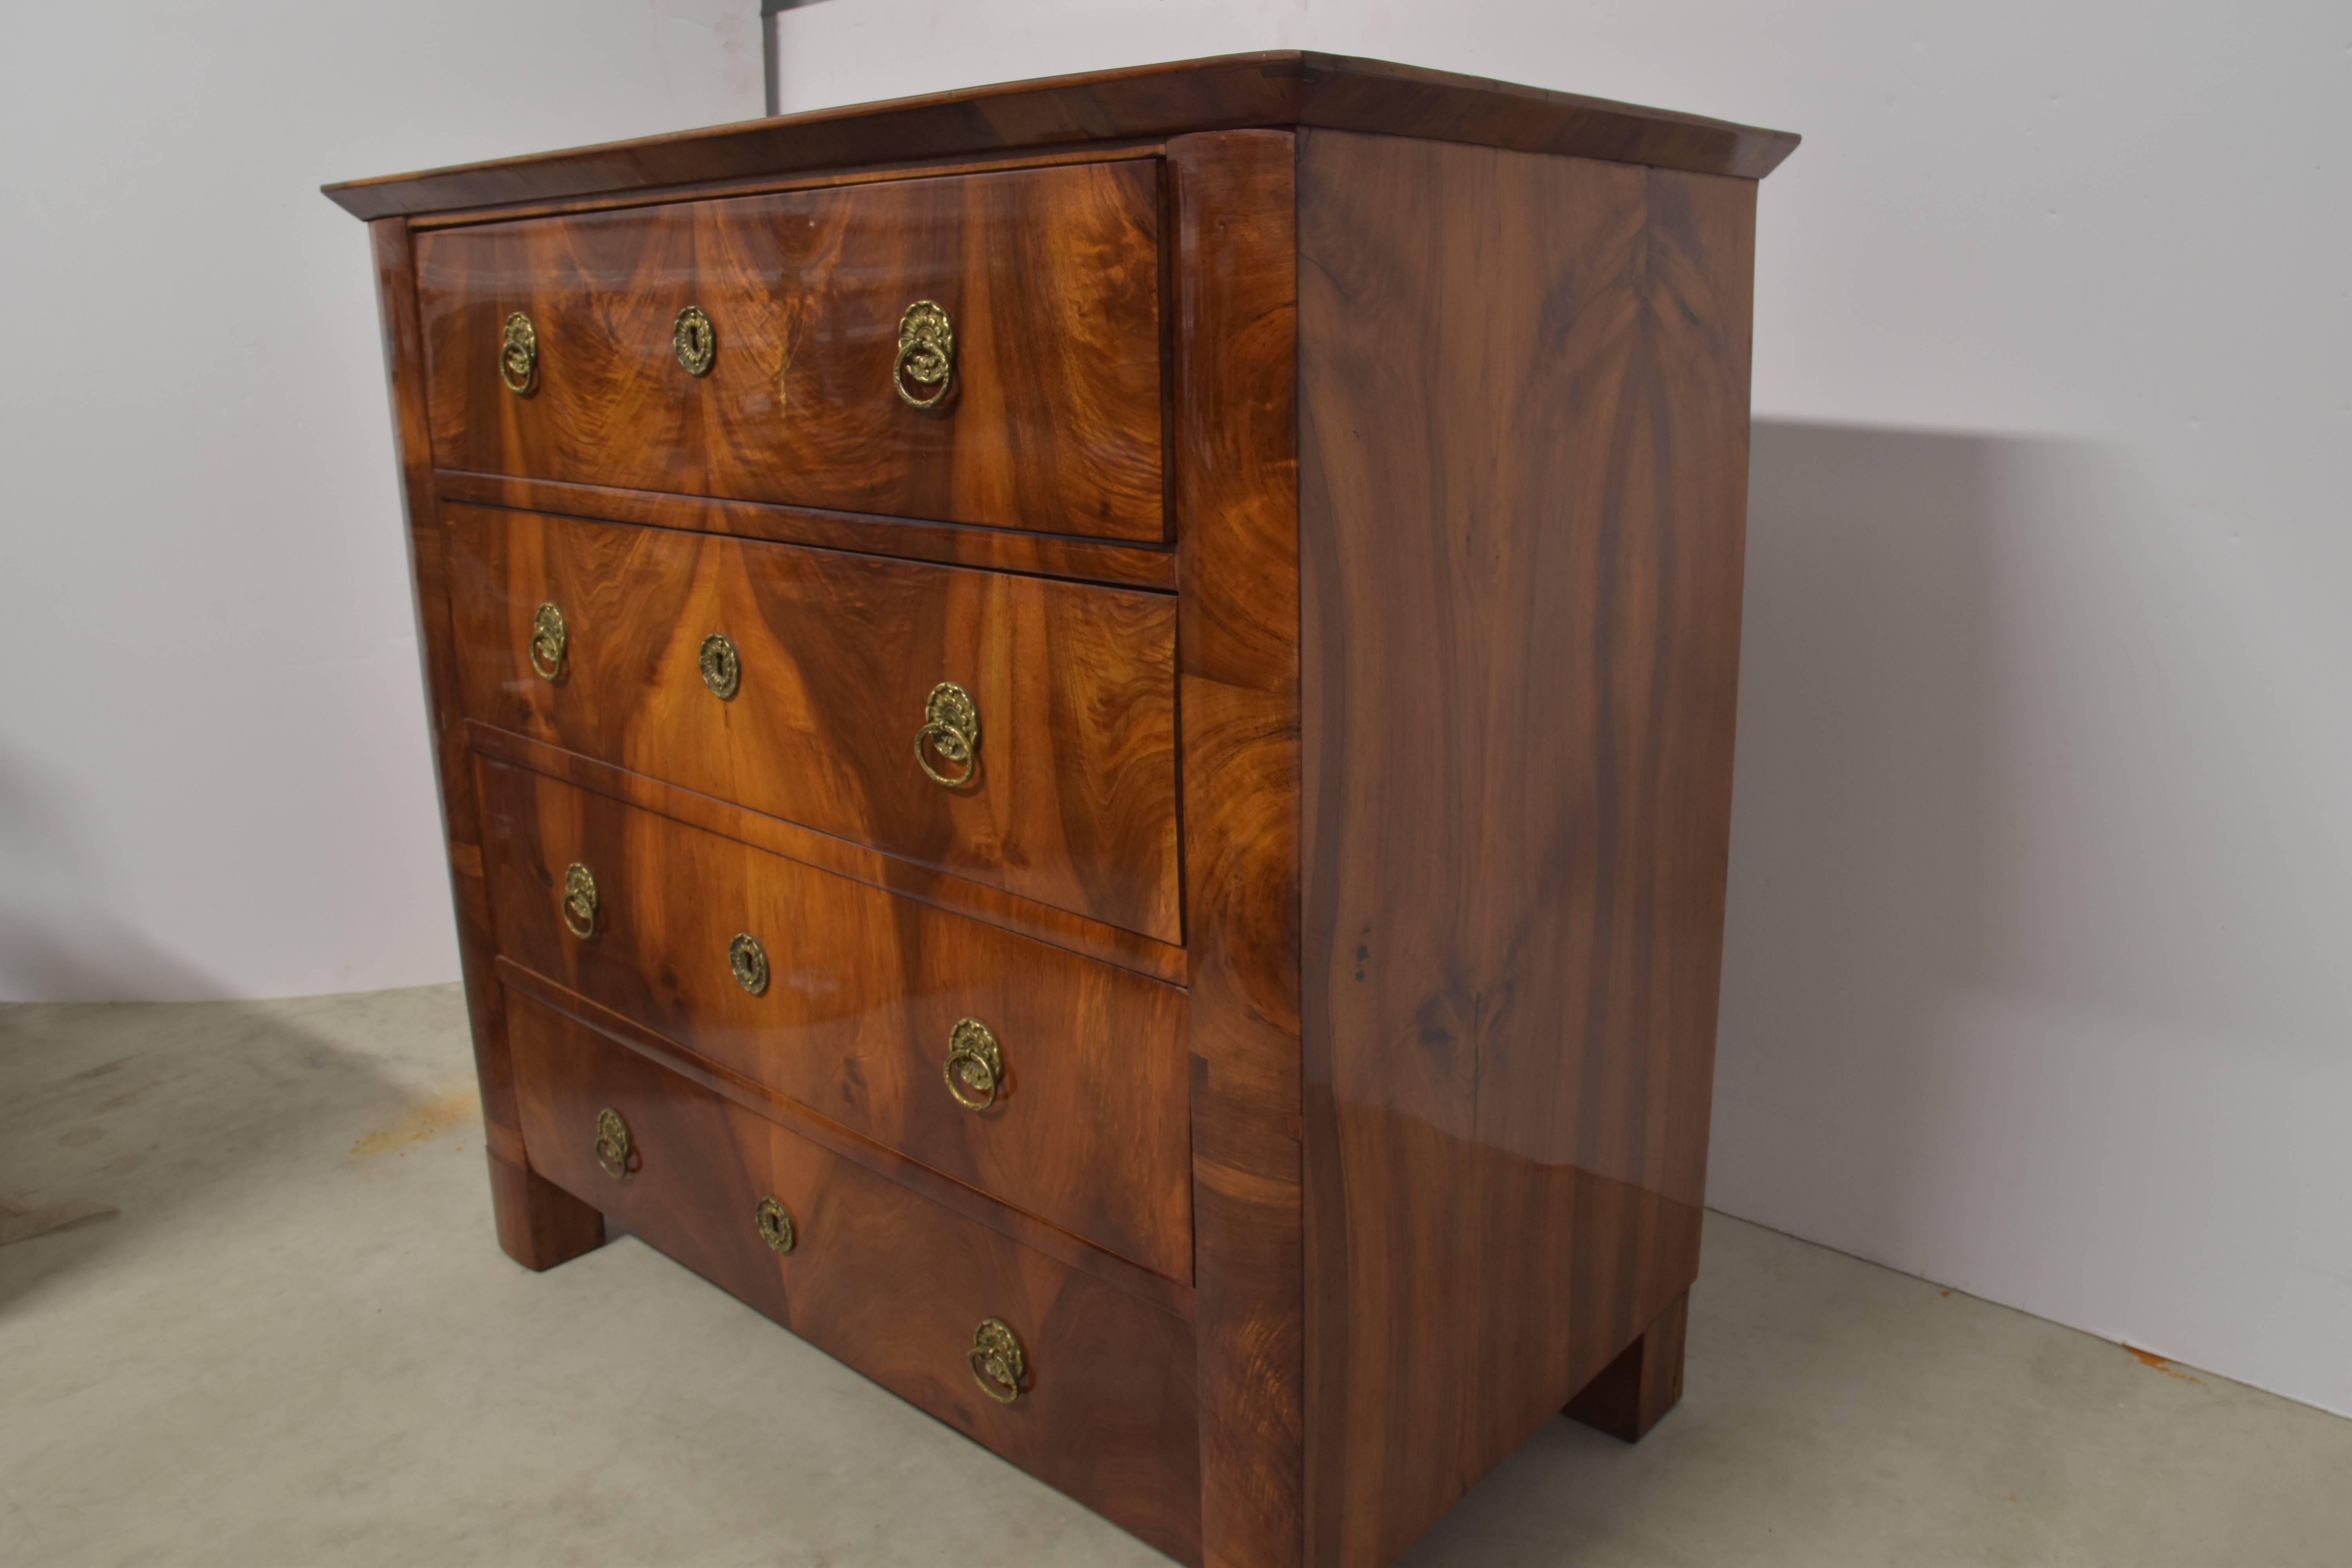 19th century Biedermeier commode in excellent condition with a beautiful French polish finish.  Each of the four drawers is highlighted with beautifully book matched fronts with original brasses.
